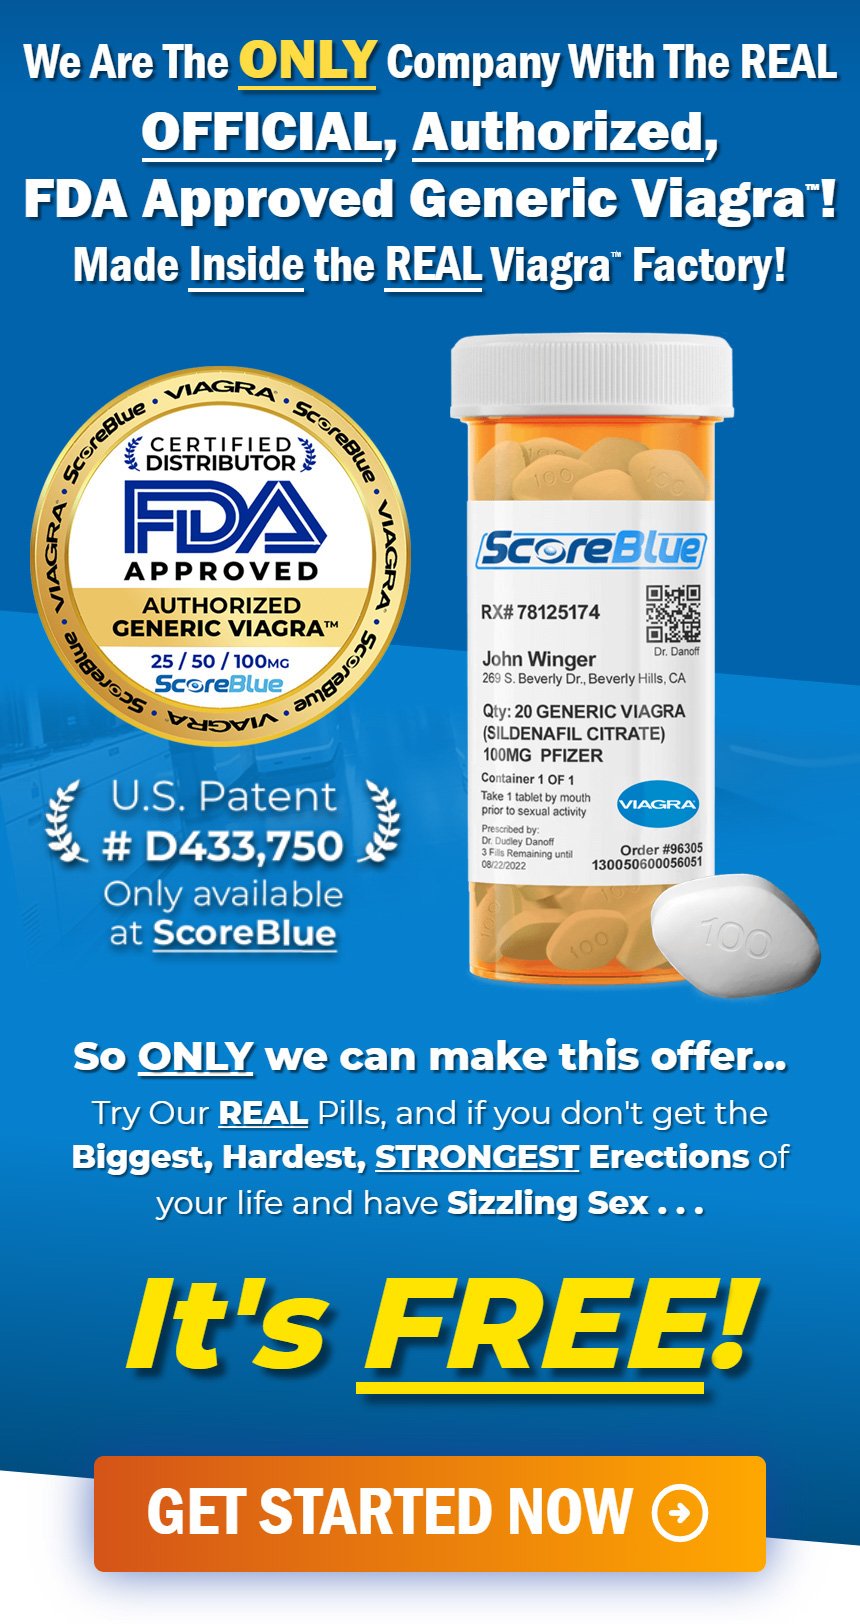 /we are the only company with the real official authorized fda approved generic viagra